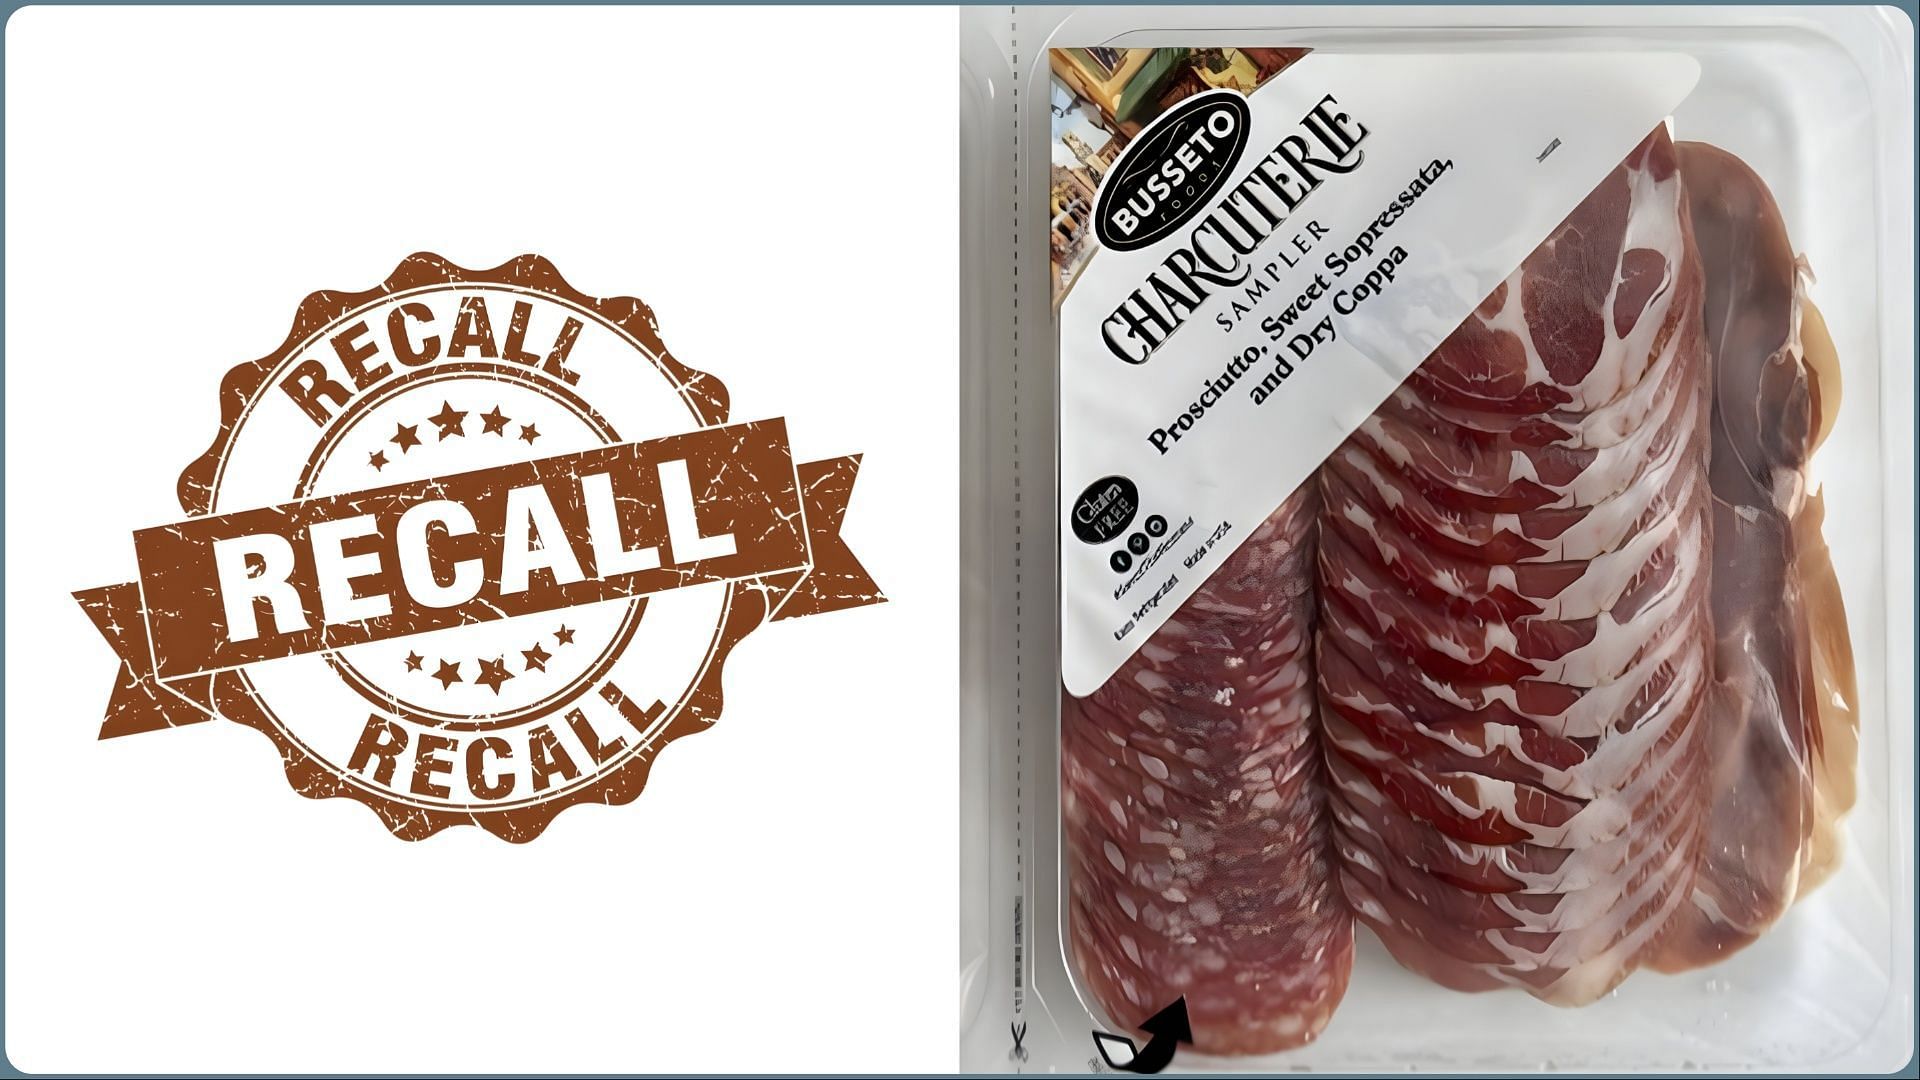 Fratelli Beretta USA, Inc. recalls ready-to-eat Charcuterie meat samplers over concerns of potential contamination (Image via FSIS)